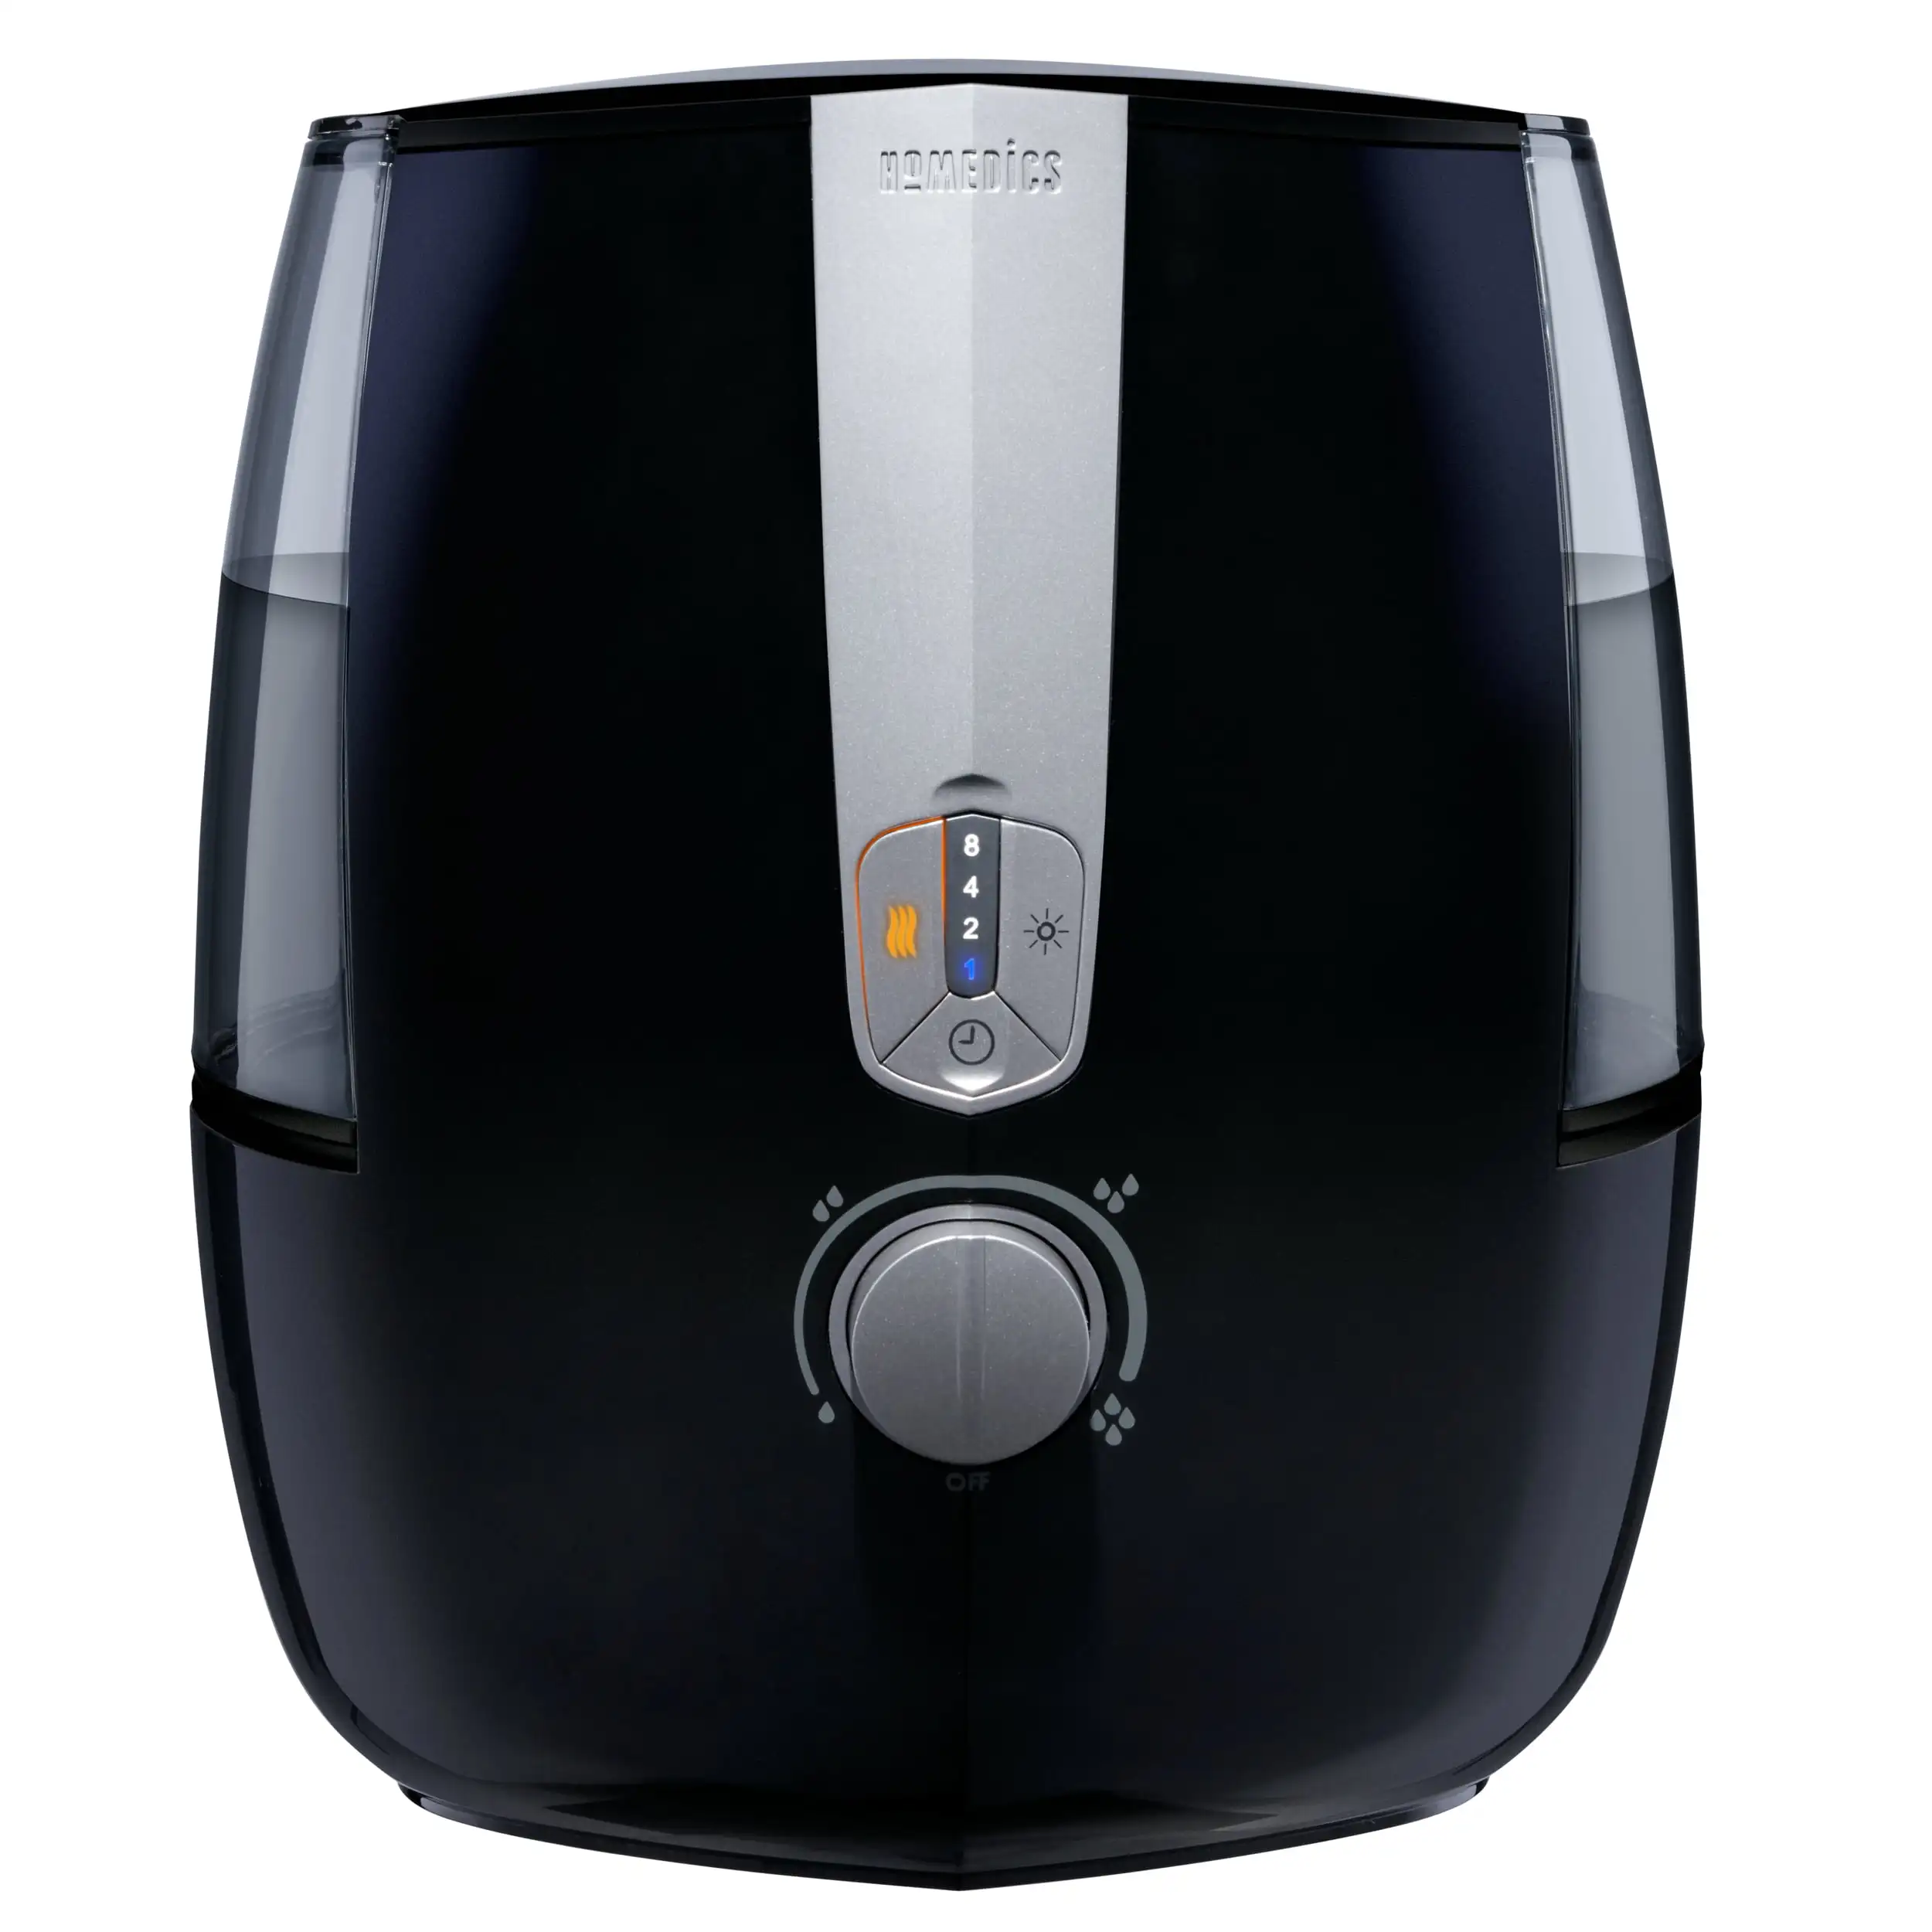 

Homedics Total Comfort Plus Ultrasonic Humidifier, 5.3L Water Tank with Warm and Cool Mist with Auto Shutoff